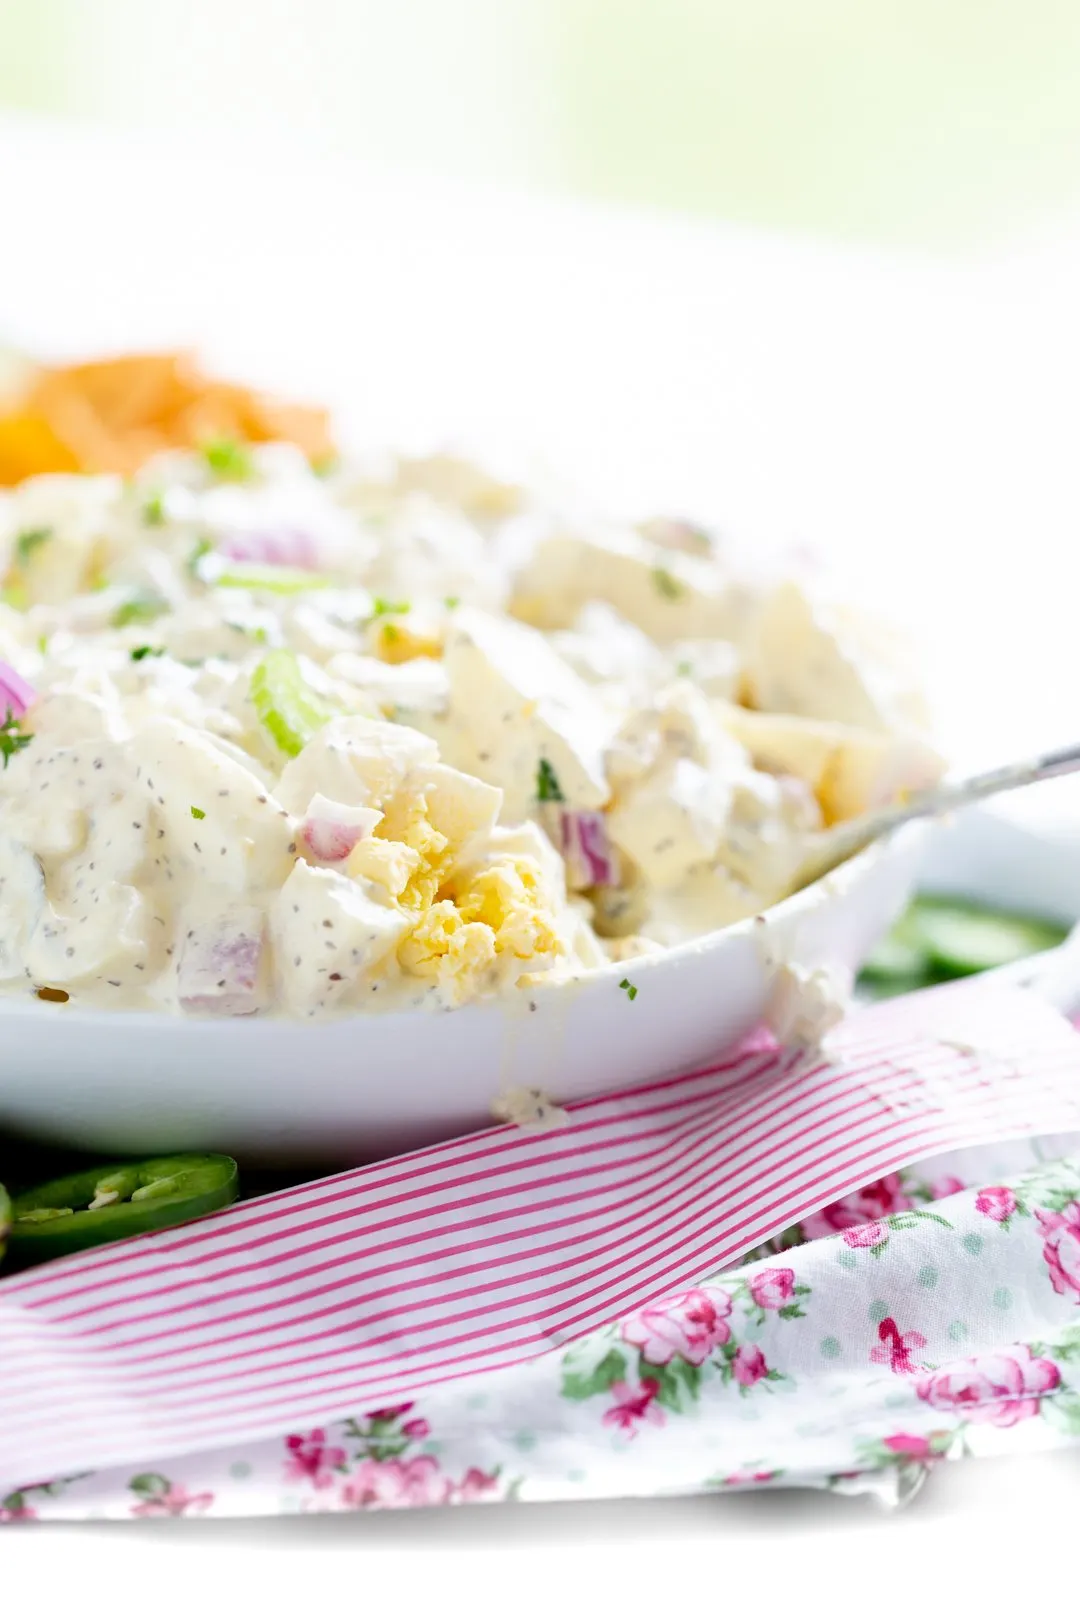 up close view of potato salad being served for summer. chopped celery, chopped red onion, parsley, chopped boiled eggs